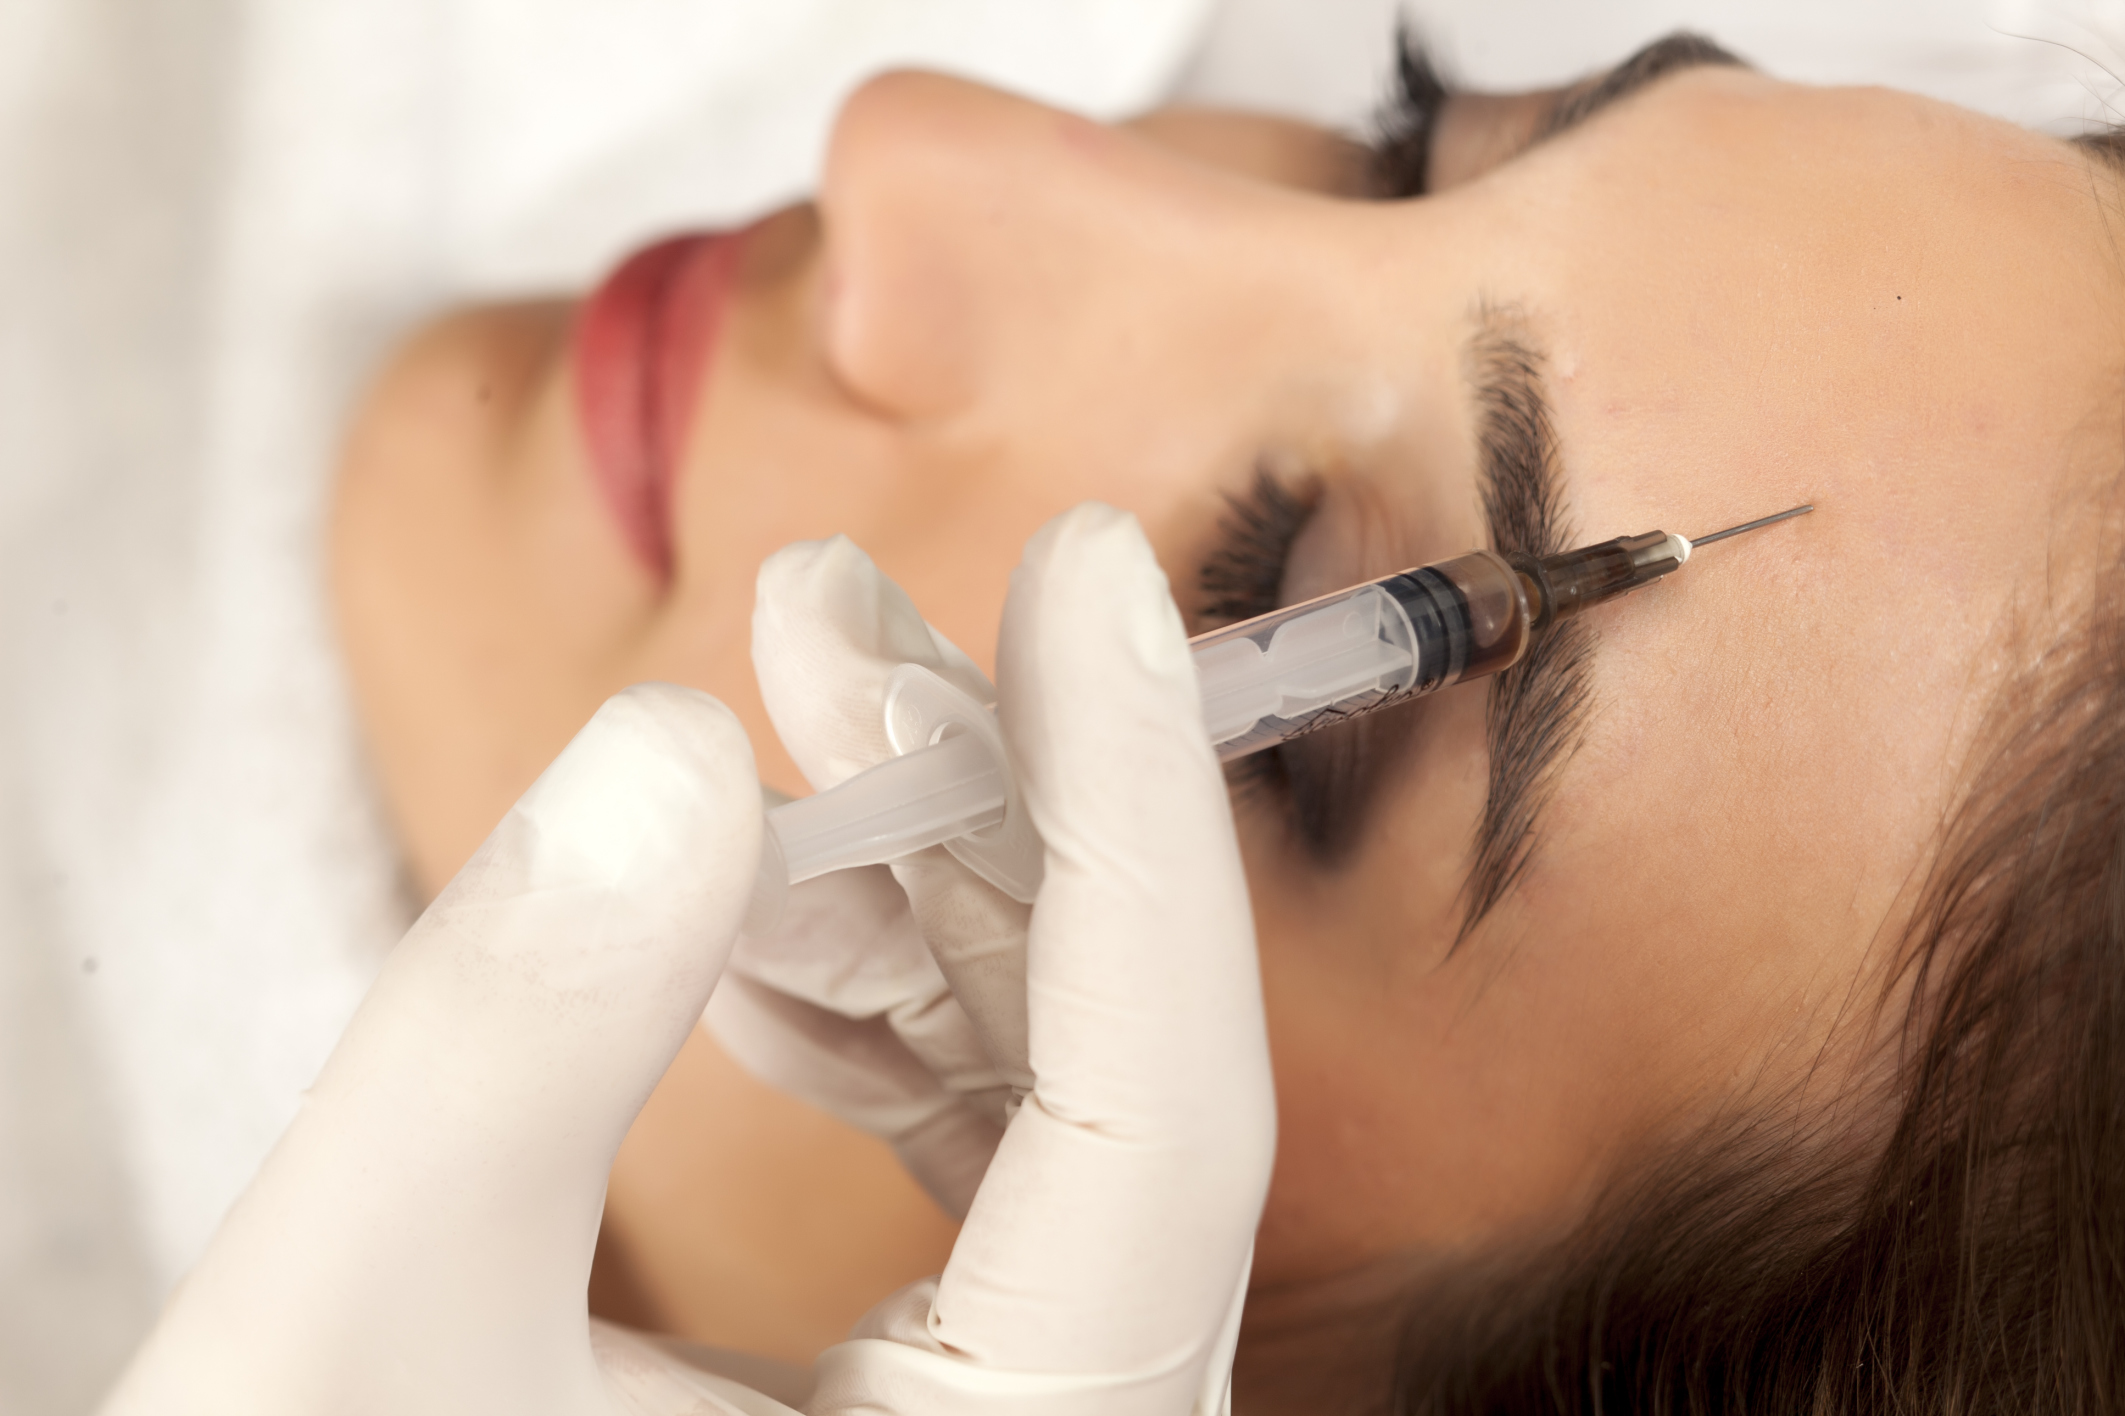 Why millennials are getting plastic surgery